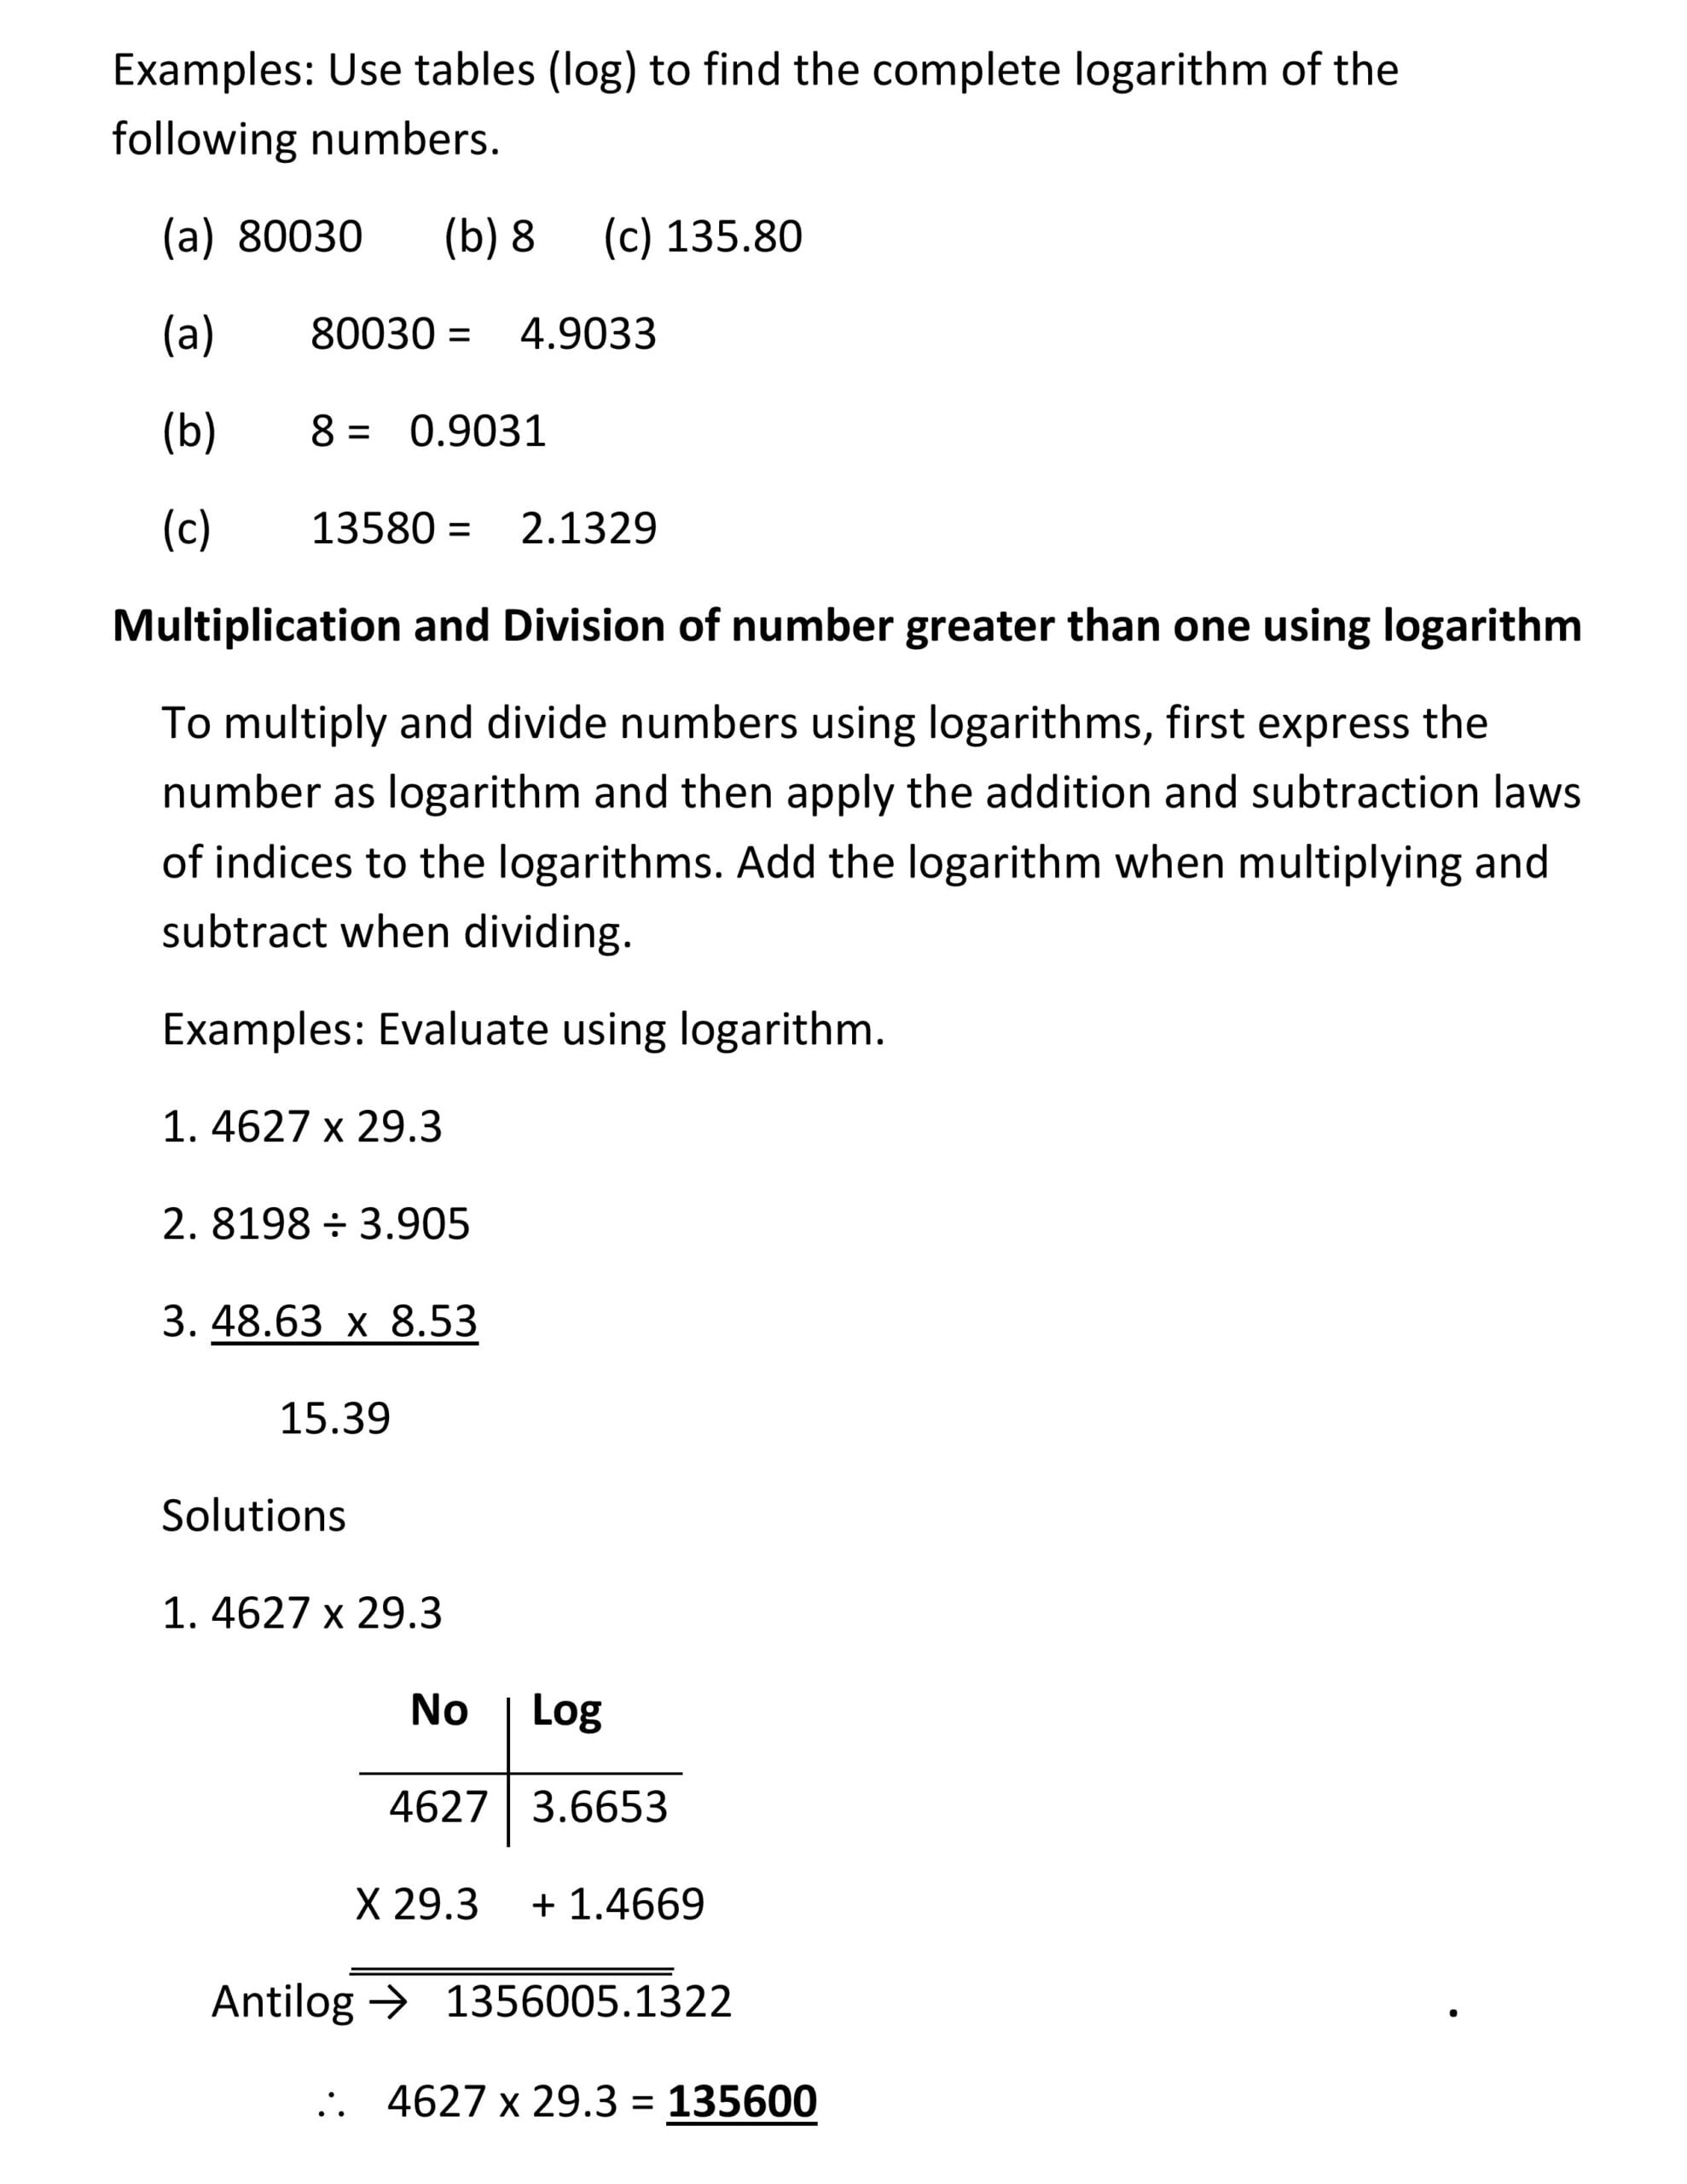 LOGARITHM OF NUMBERS LESS THAN ONE_3